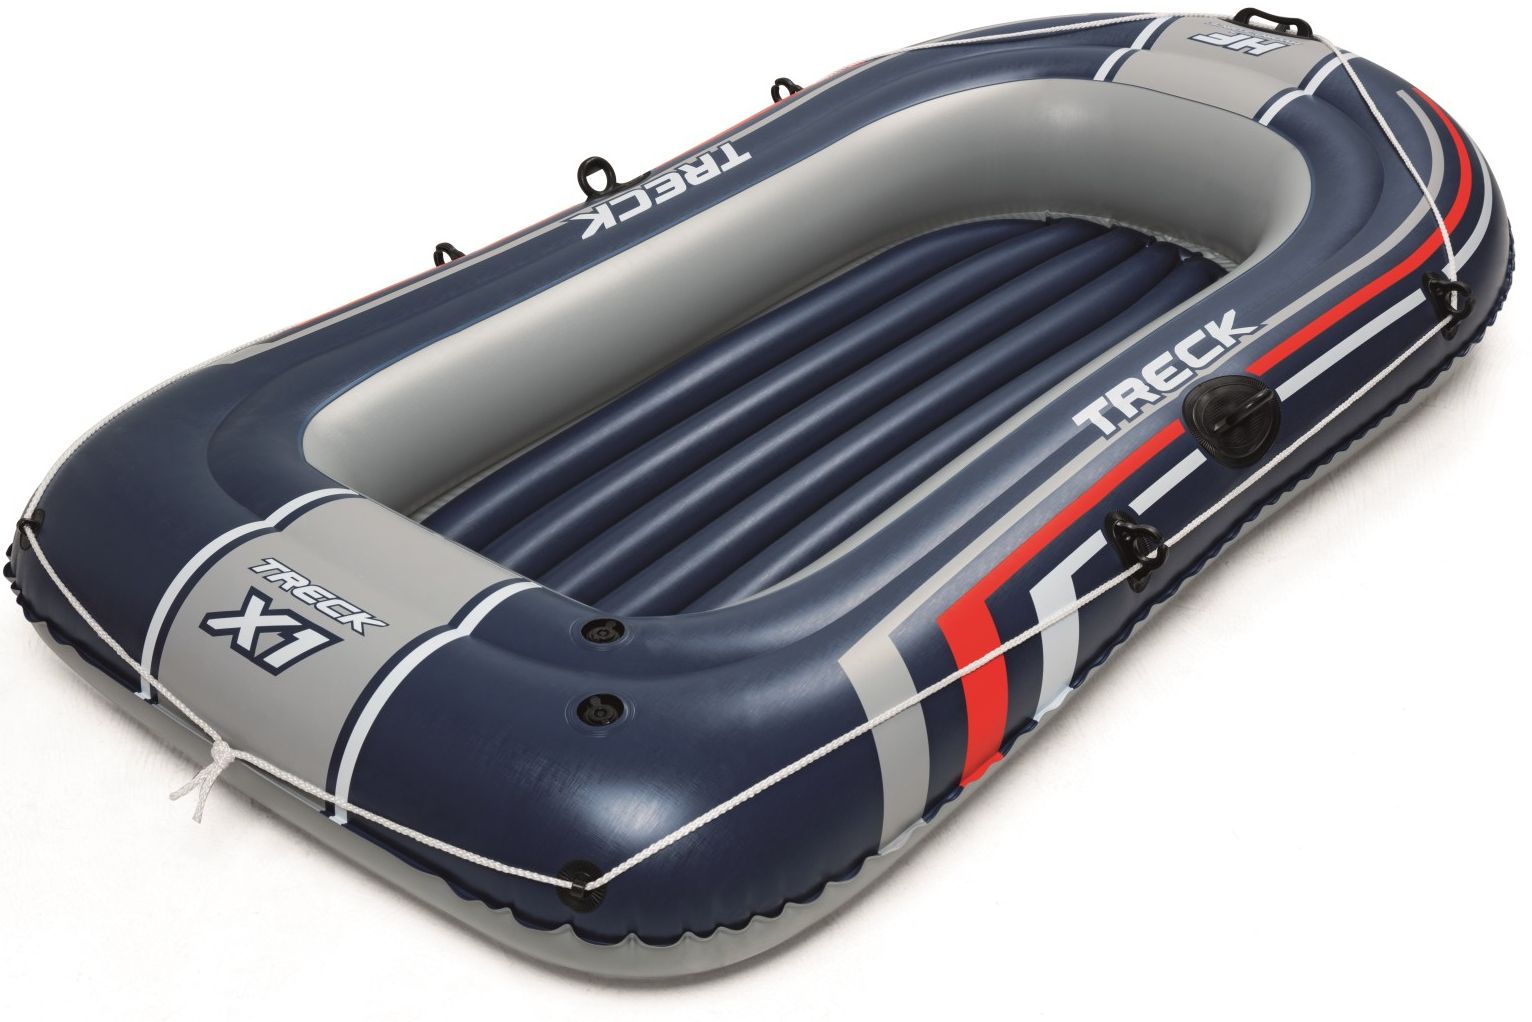 90"X48" HYDRO-FORCE RAFT - Inflatable boat